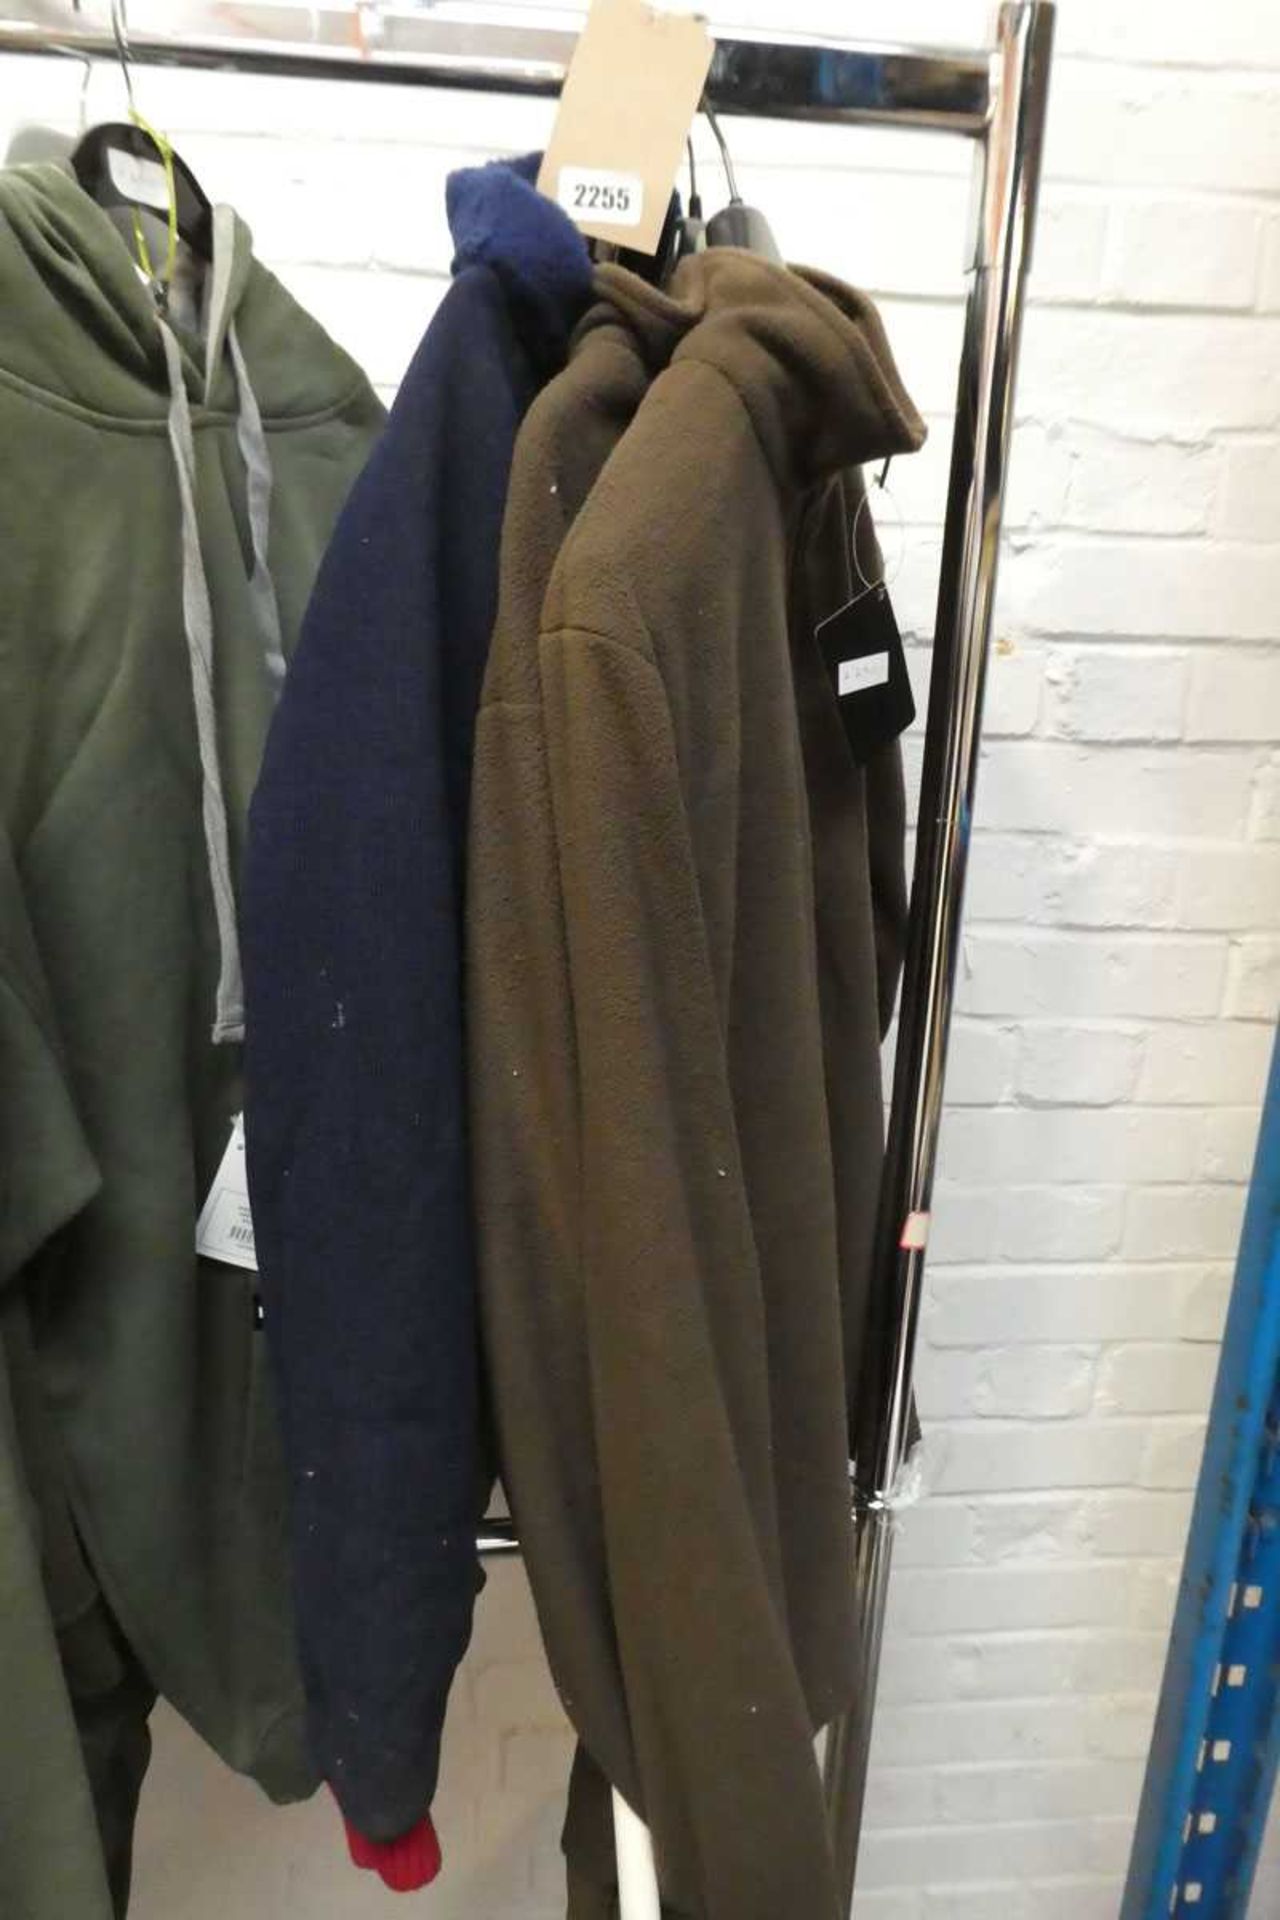 Pair of Avid Anywhere fleeces (sizes M & XXL), together with an Artic thermal zip up jacket (size